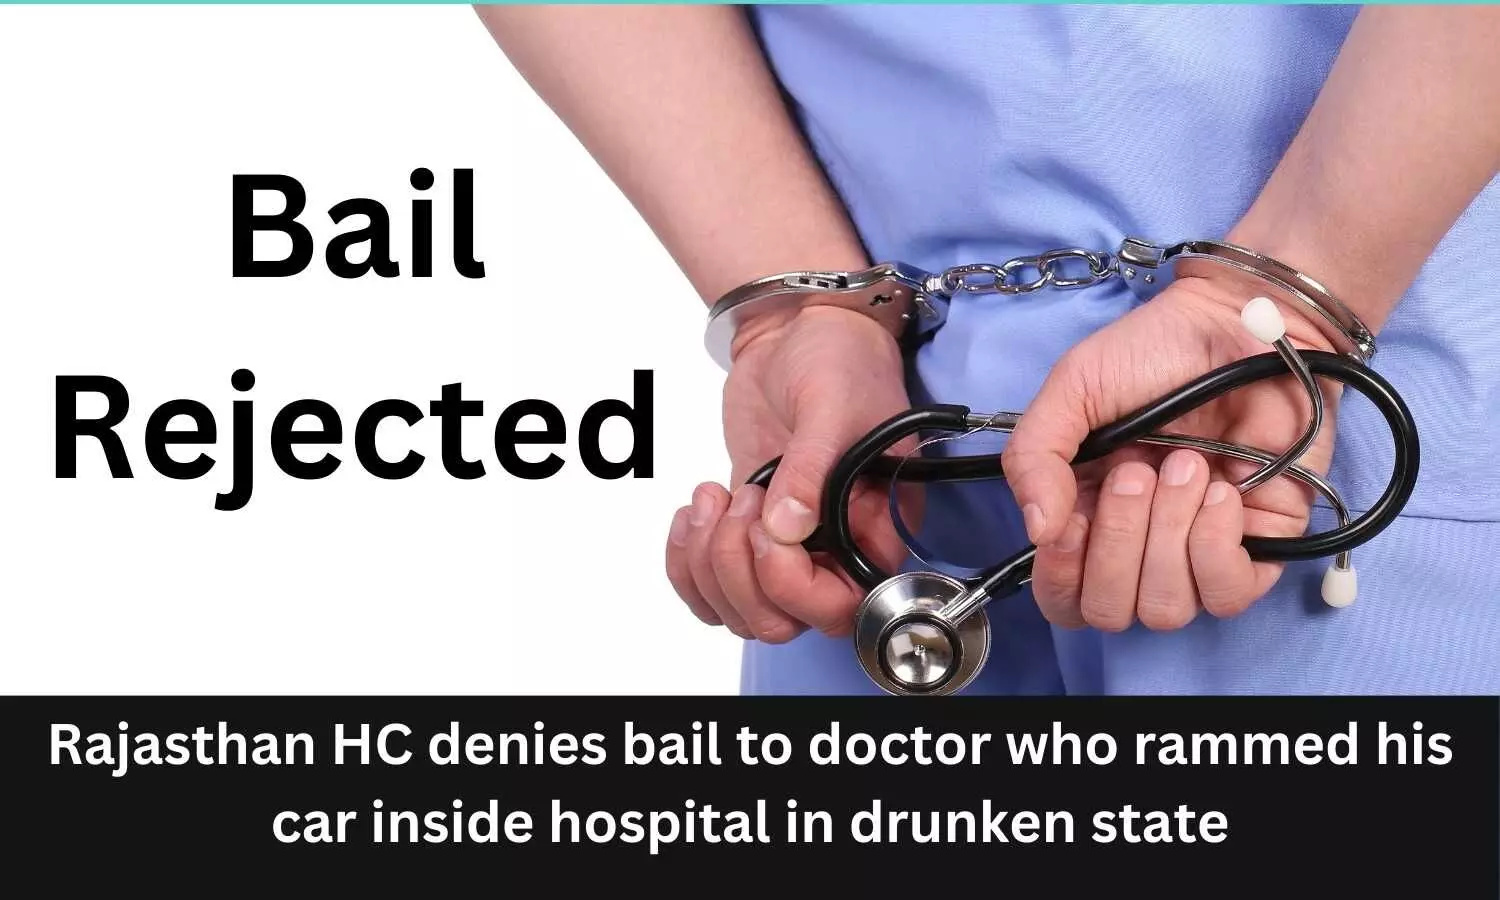 Rajasthan HC denies bail to doctor who rammed his car inside hospital in drunken state